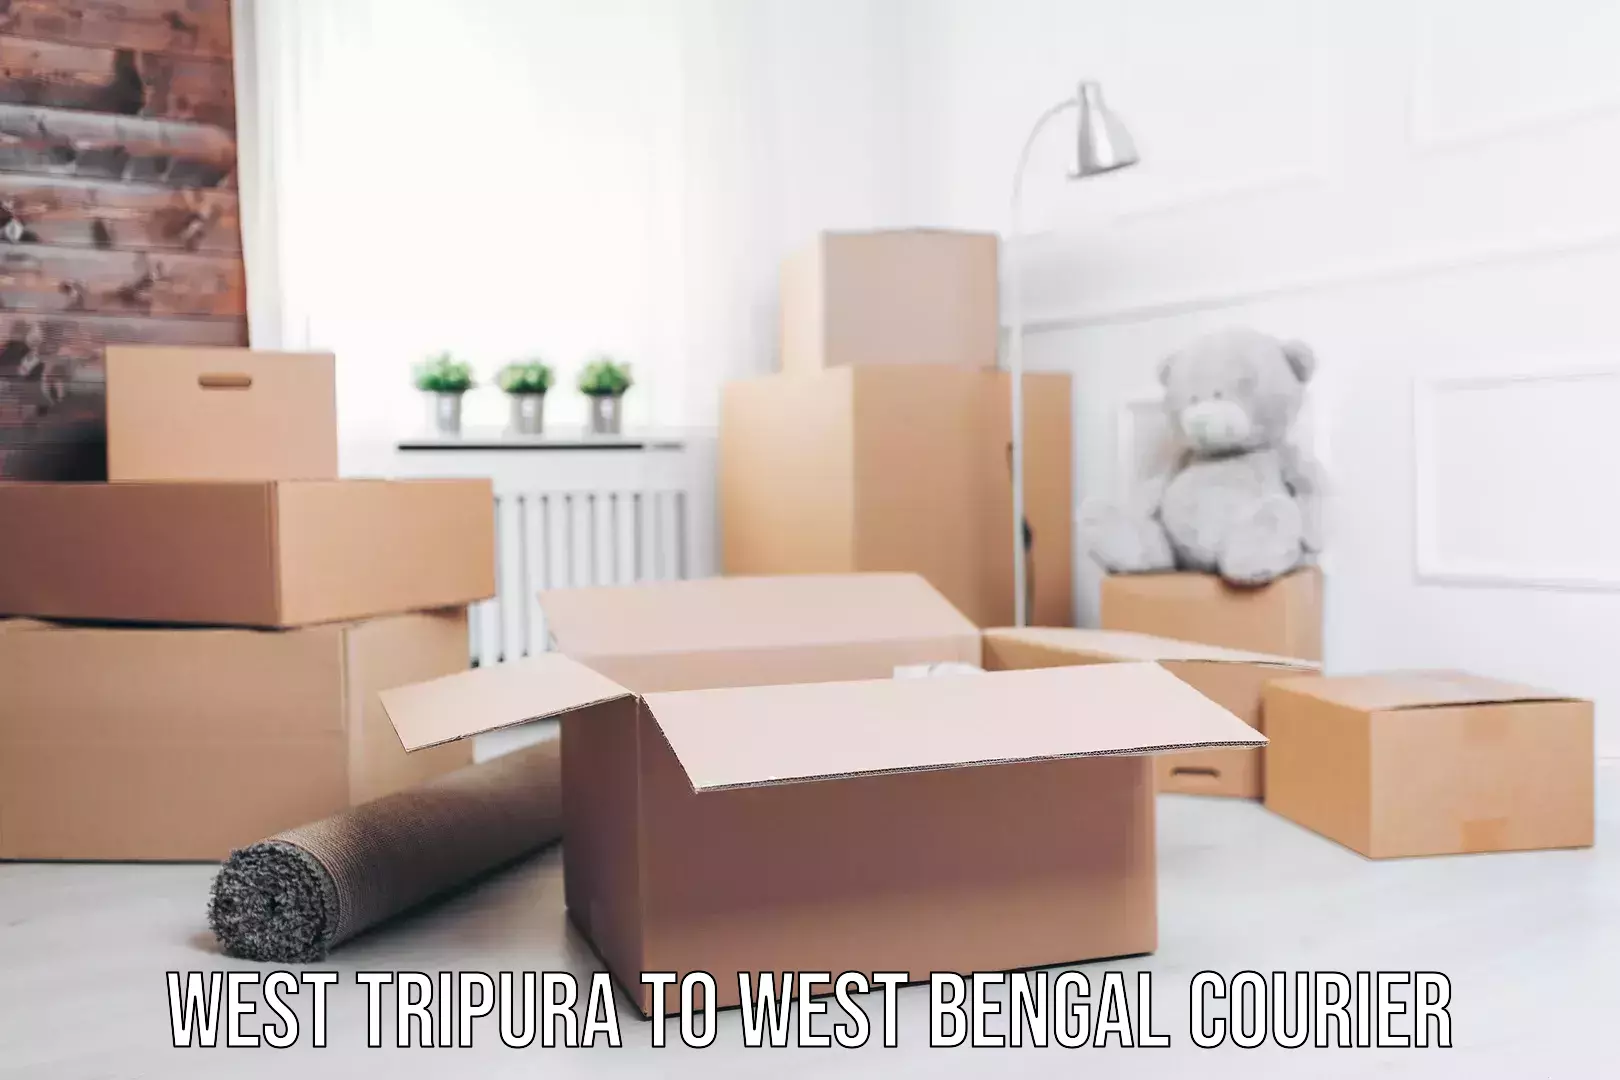 Affordable parcel service West Tripura to West Bengal